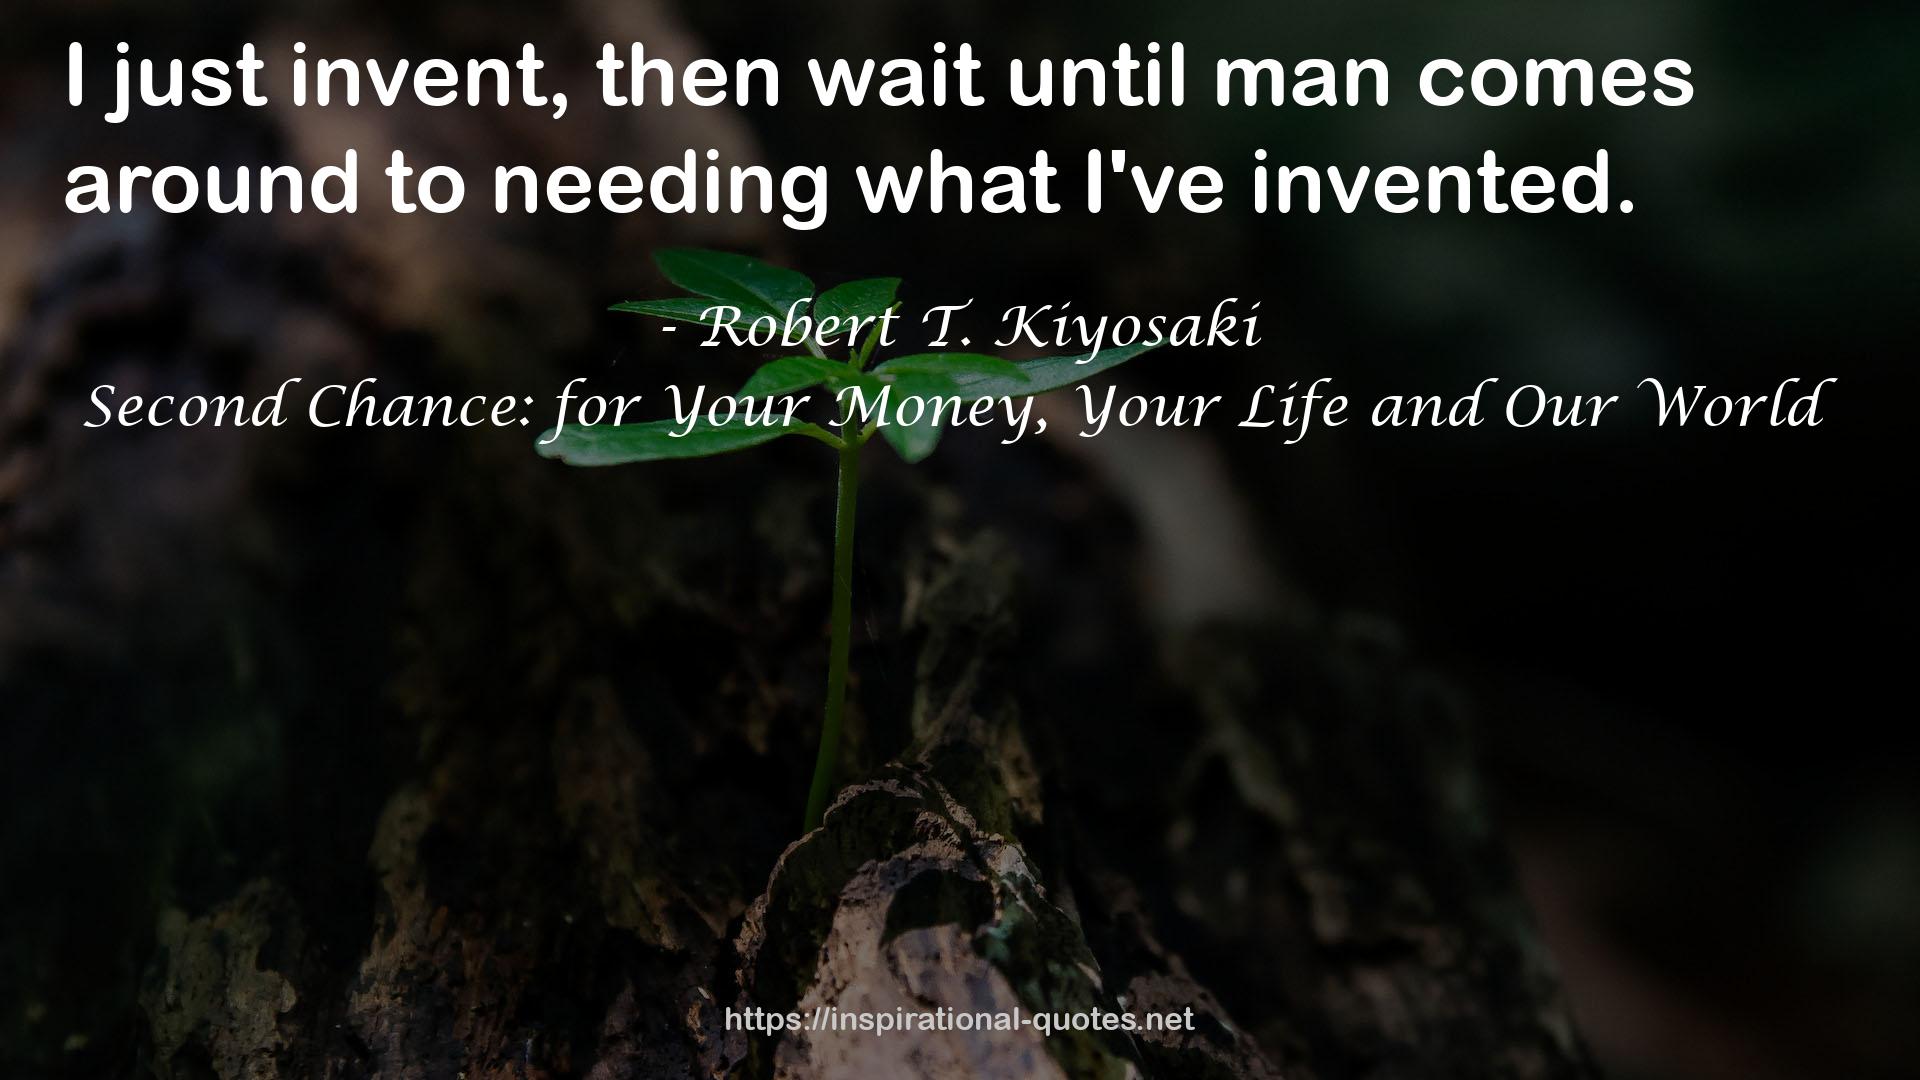 Second Chance: for Your Money, Your Life and Our World QUOTES